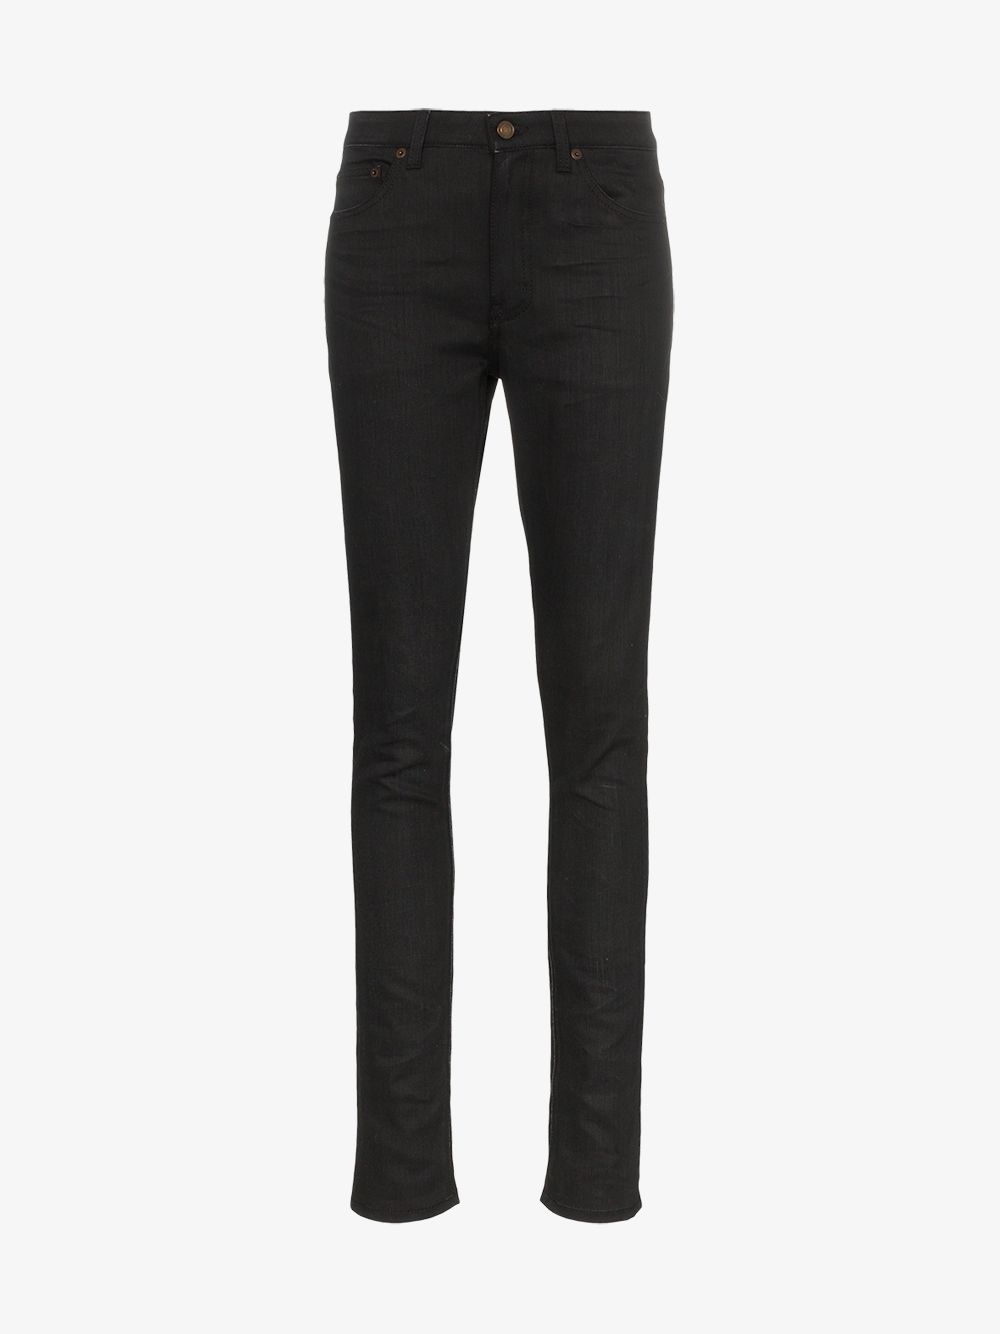 Black stretch cotton mid-rise skinny jeans